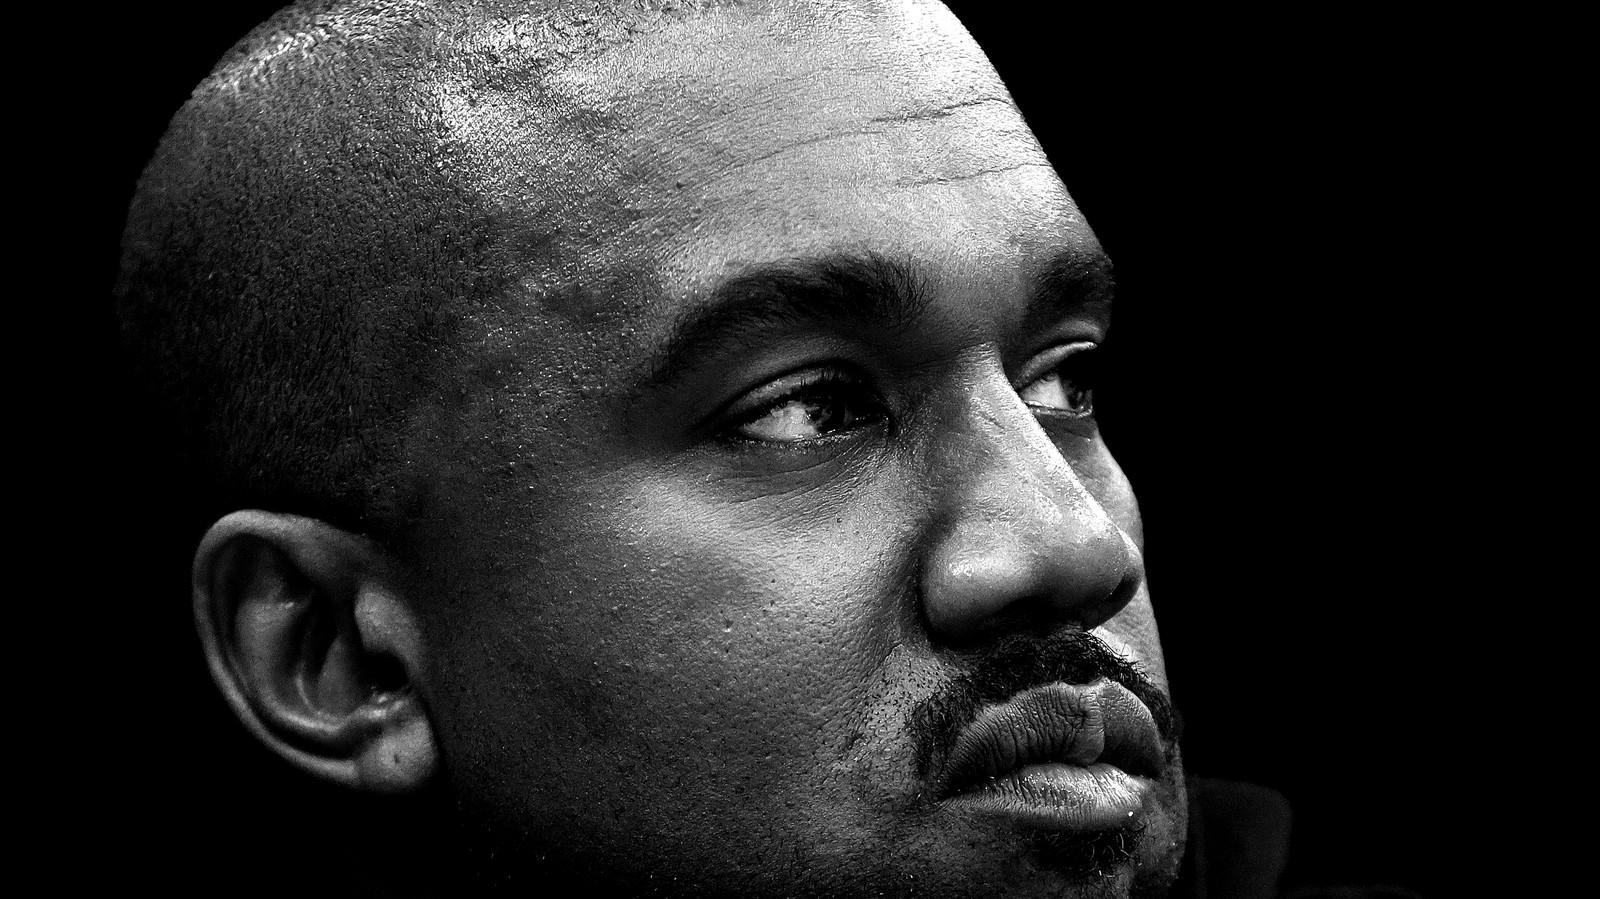 Kanye West Finally Says What He Means The Atlantic